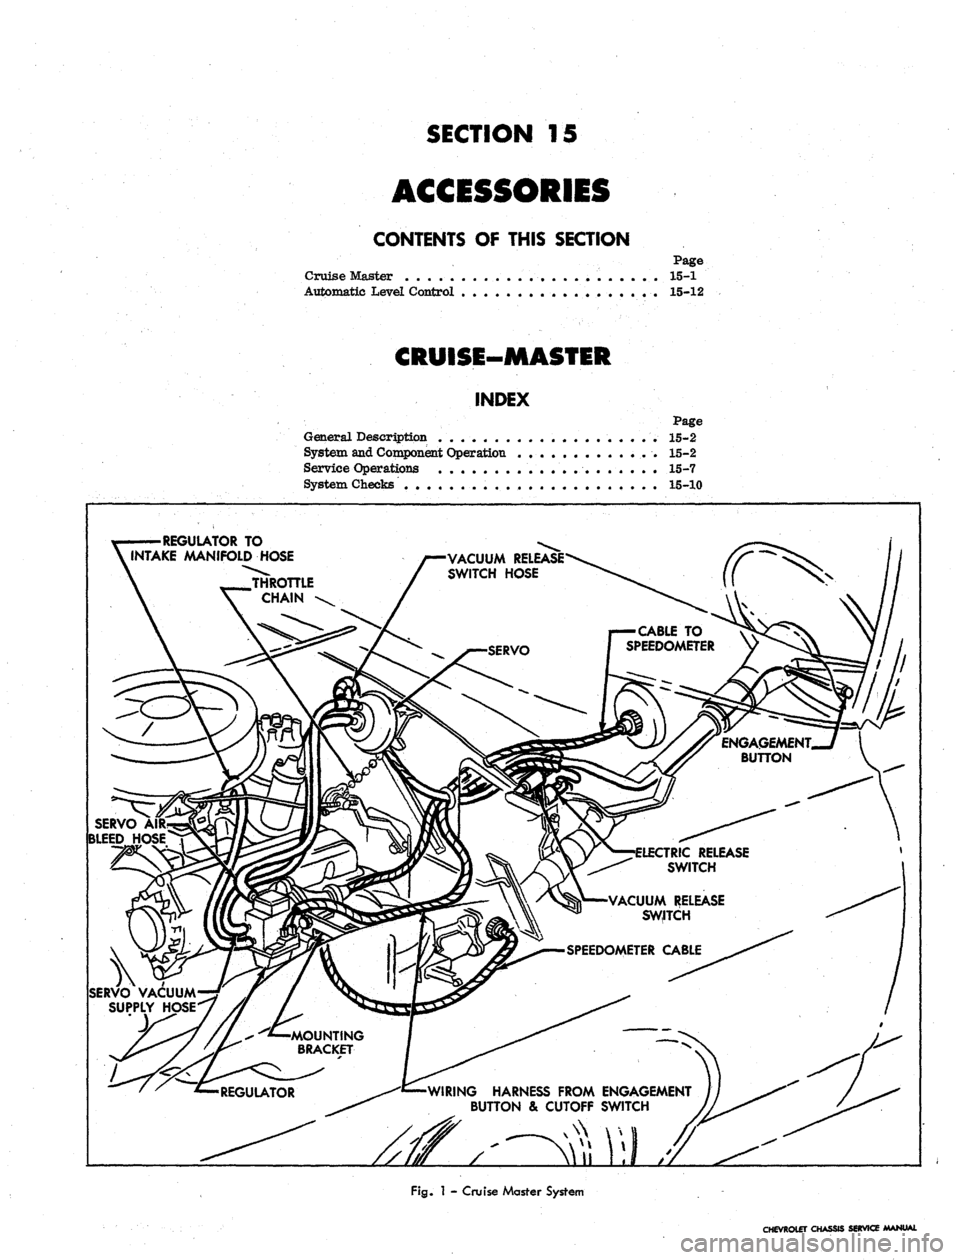 CHEVROLET CAMARO 1967 1.G Chassis Workshop Manual 
SECTION 15

ACCESSORIES

CONTENTS OF THIS SECTION

Page

Cruise Master . . . . .......... 15-1

Automatic Level Control 15-12

CRUISE-MASTER

INDEX

Page

General Description . 15-2

System and Compo